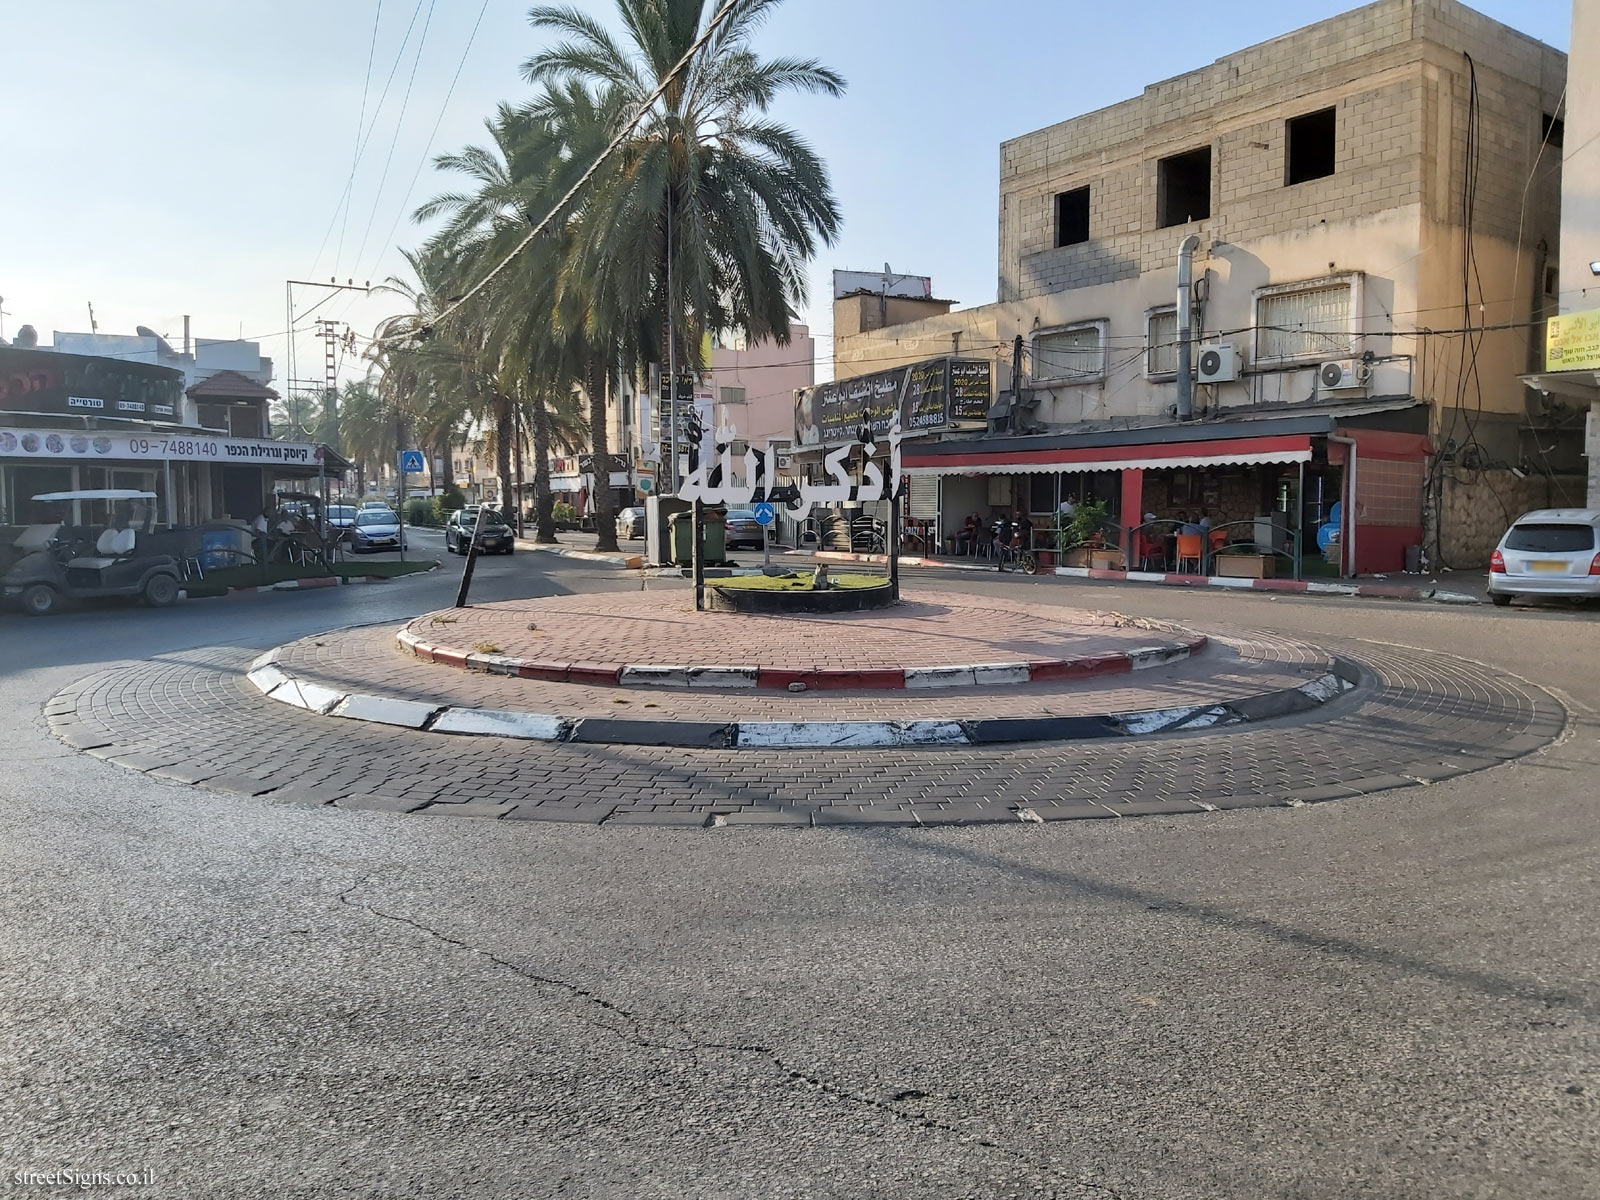 Qalansawe - A square in praise of Allah